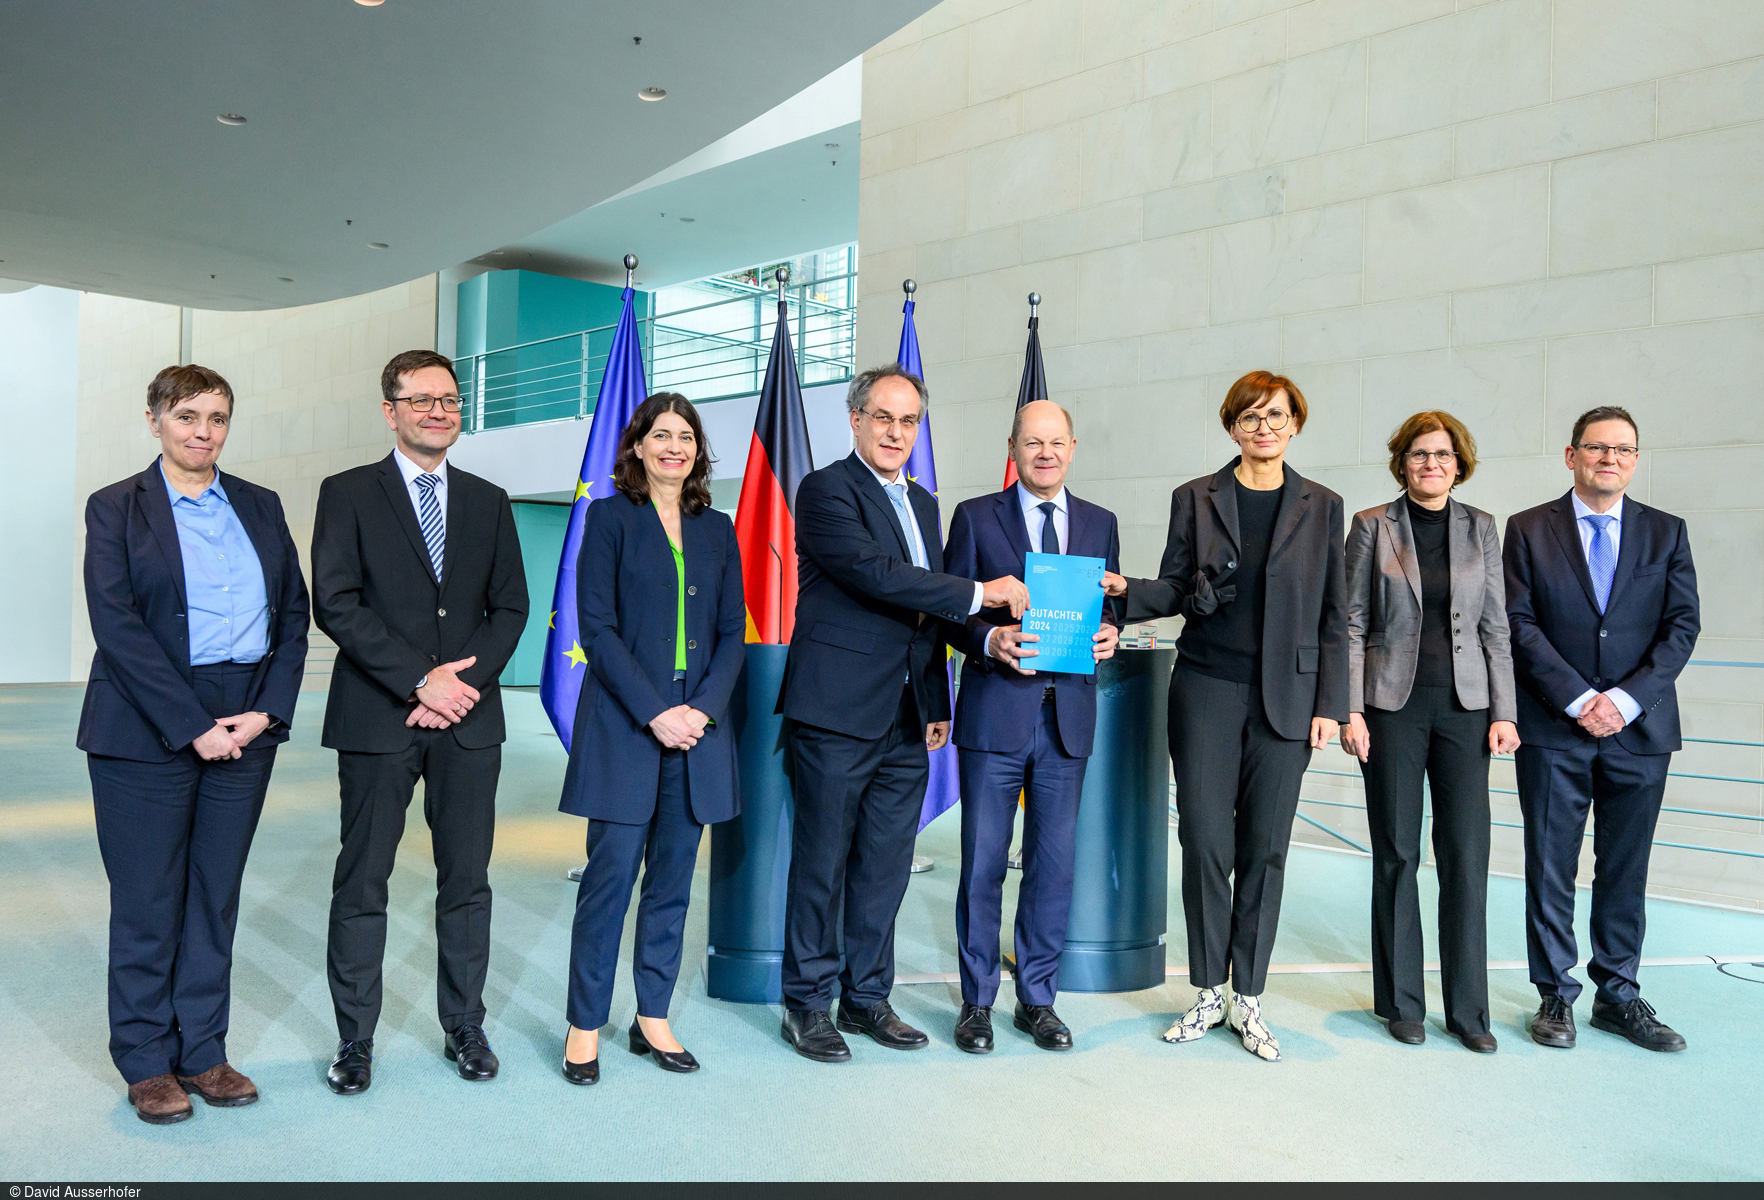 The Commission of Experts for Research and Innovation (EFI) hands over its report to the Federal Government. From left to right: Prof. Dr. Dr. h.c. Friederike Welter, Prof. Dr. Till Requate, Prof. Dr. Carolin Häussler, Prof. Dr. Uwe Cantner, Olaf Scholz, Bettina Stark-Watzinger, Prof. Dr. Irene Bertschek und Prof. Dr. Guido Bünstorf.